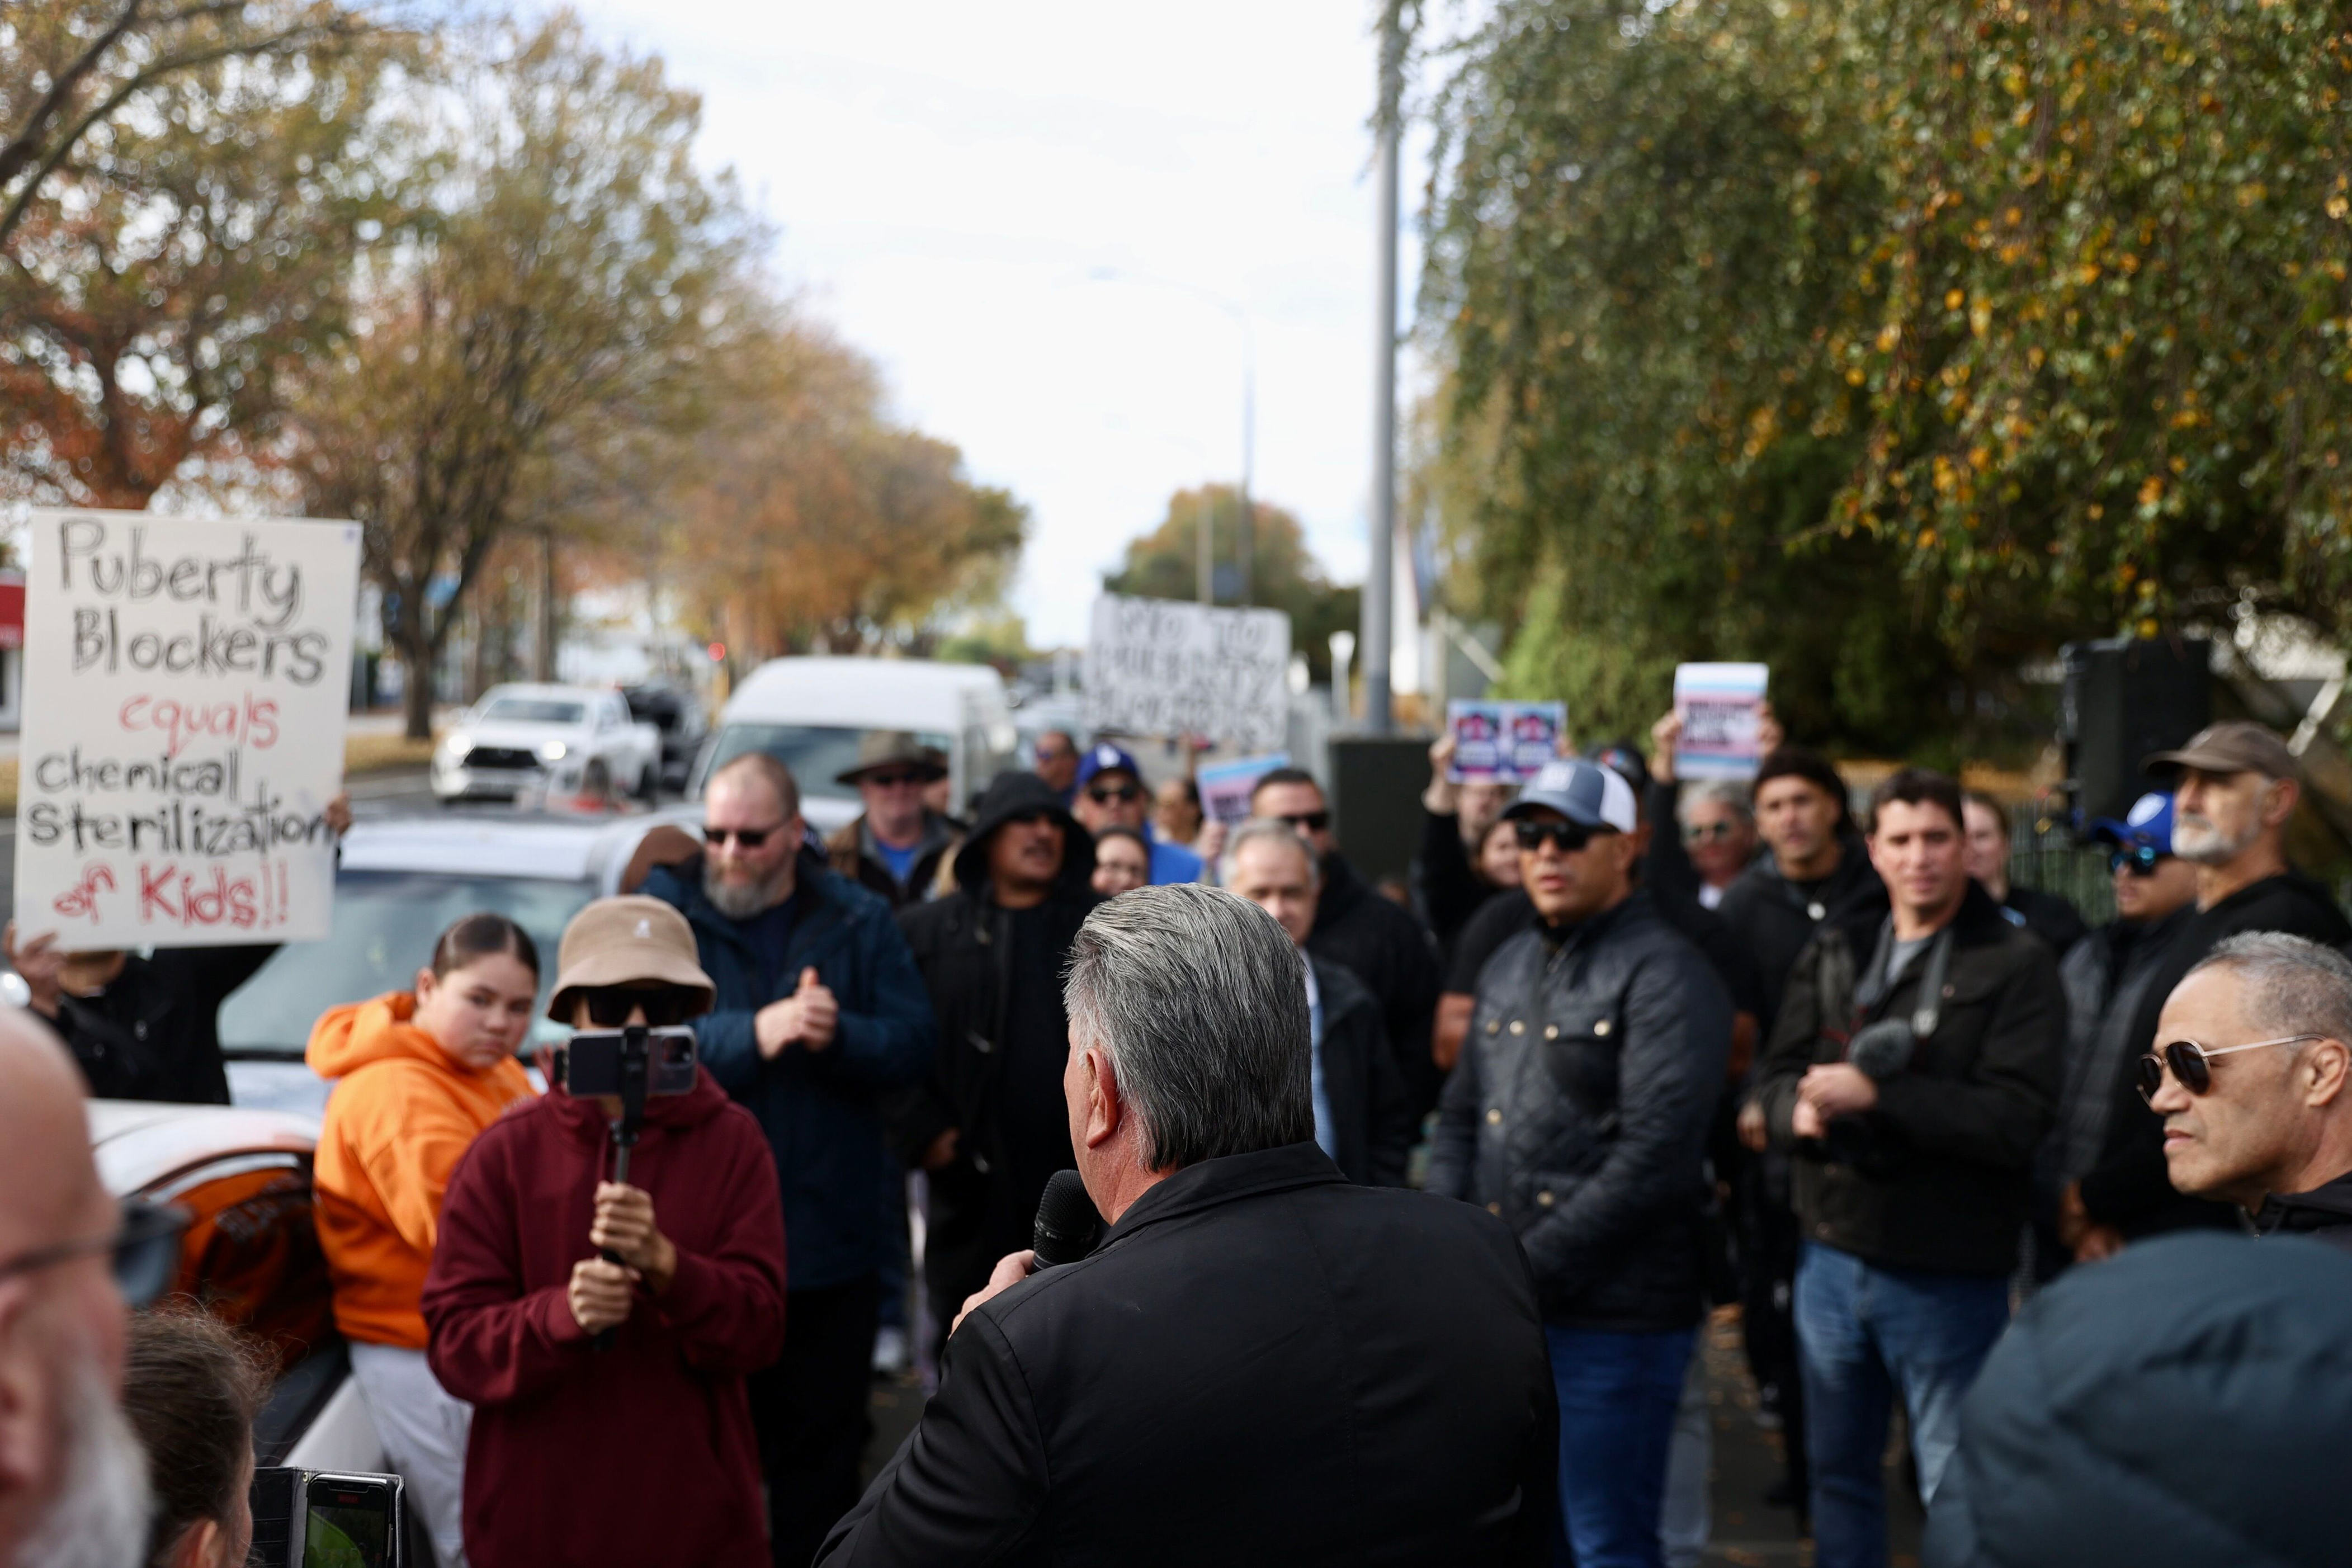 destiny church leader brian tamaki trans protest in christchurch met with counter-protest